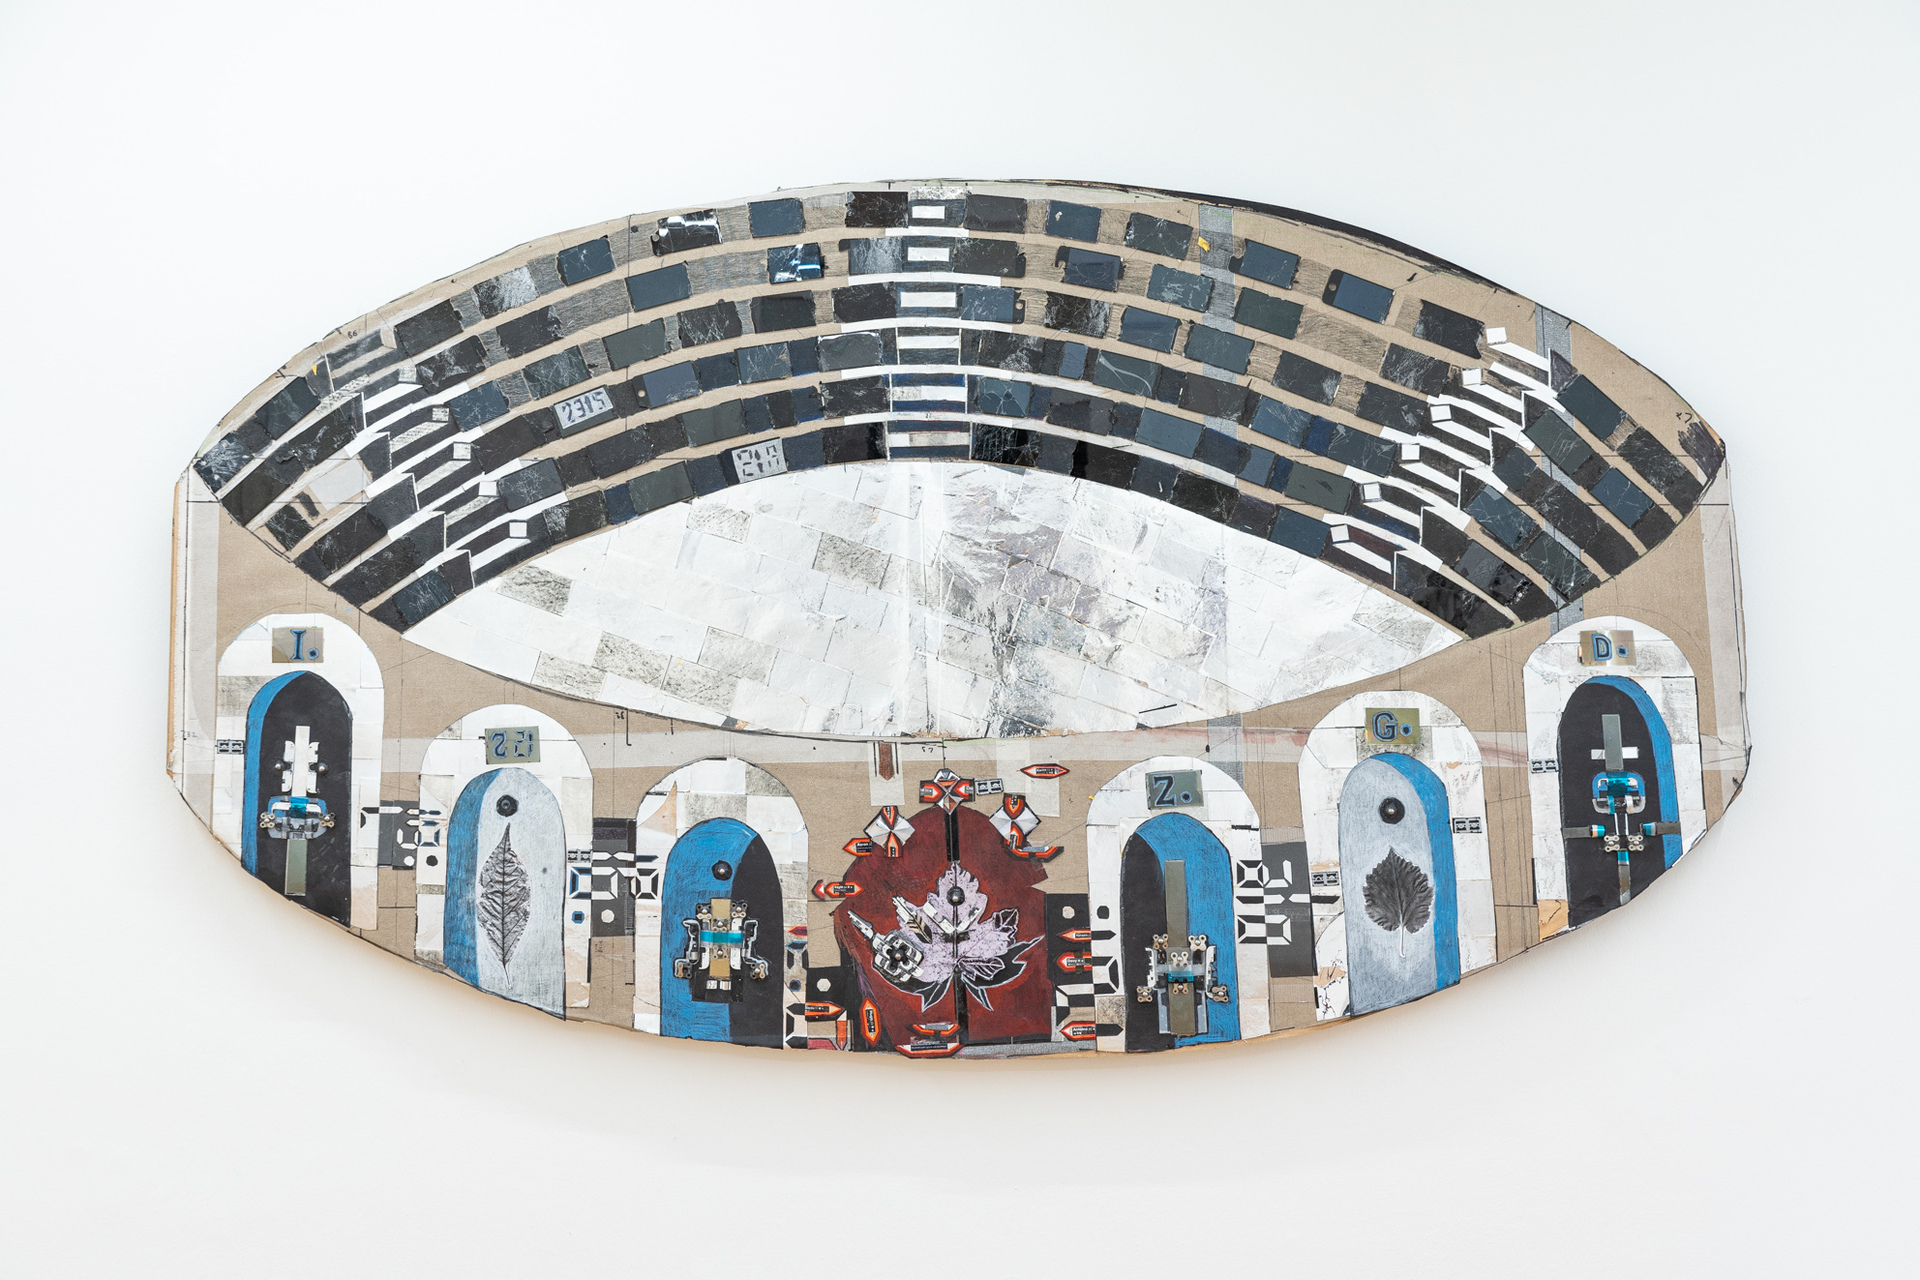 Anna Solal, "Arena", 2022, drawing, mixed media on wood, 130 x 232 x 6 cm